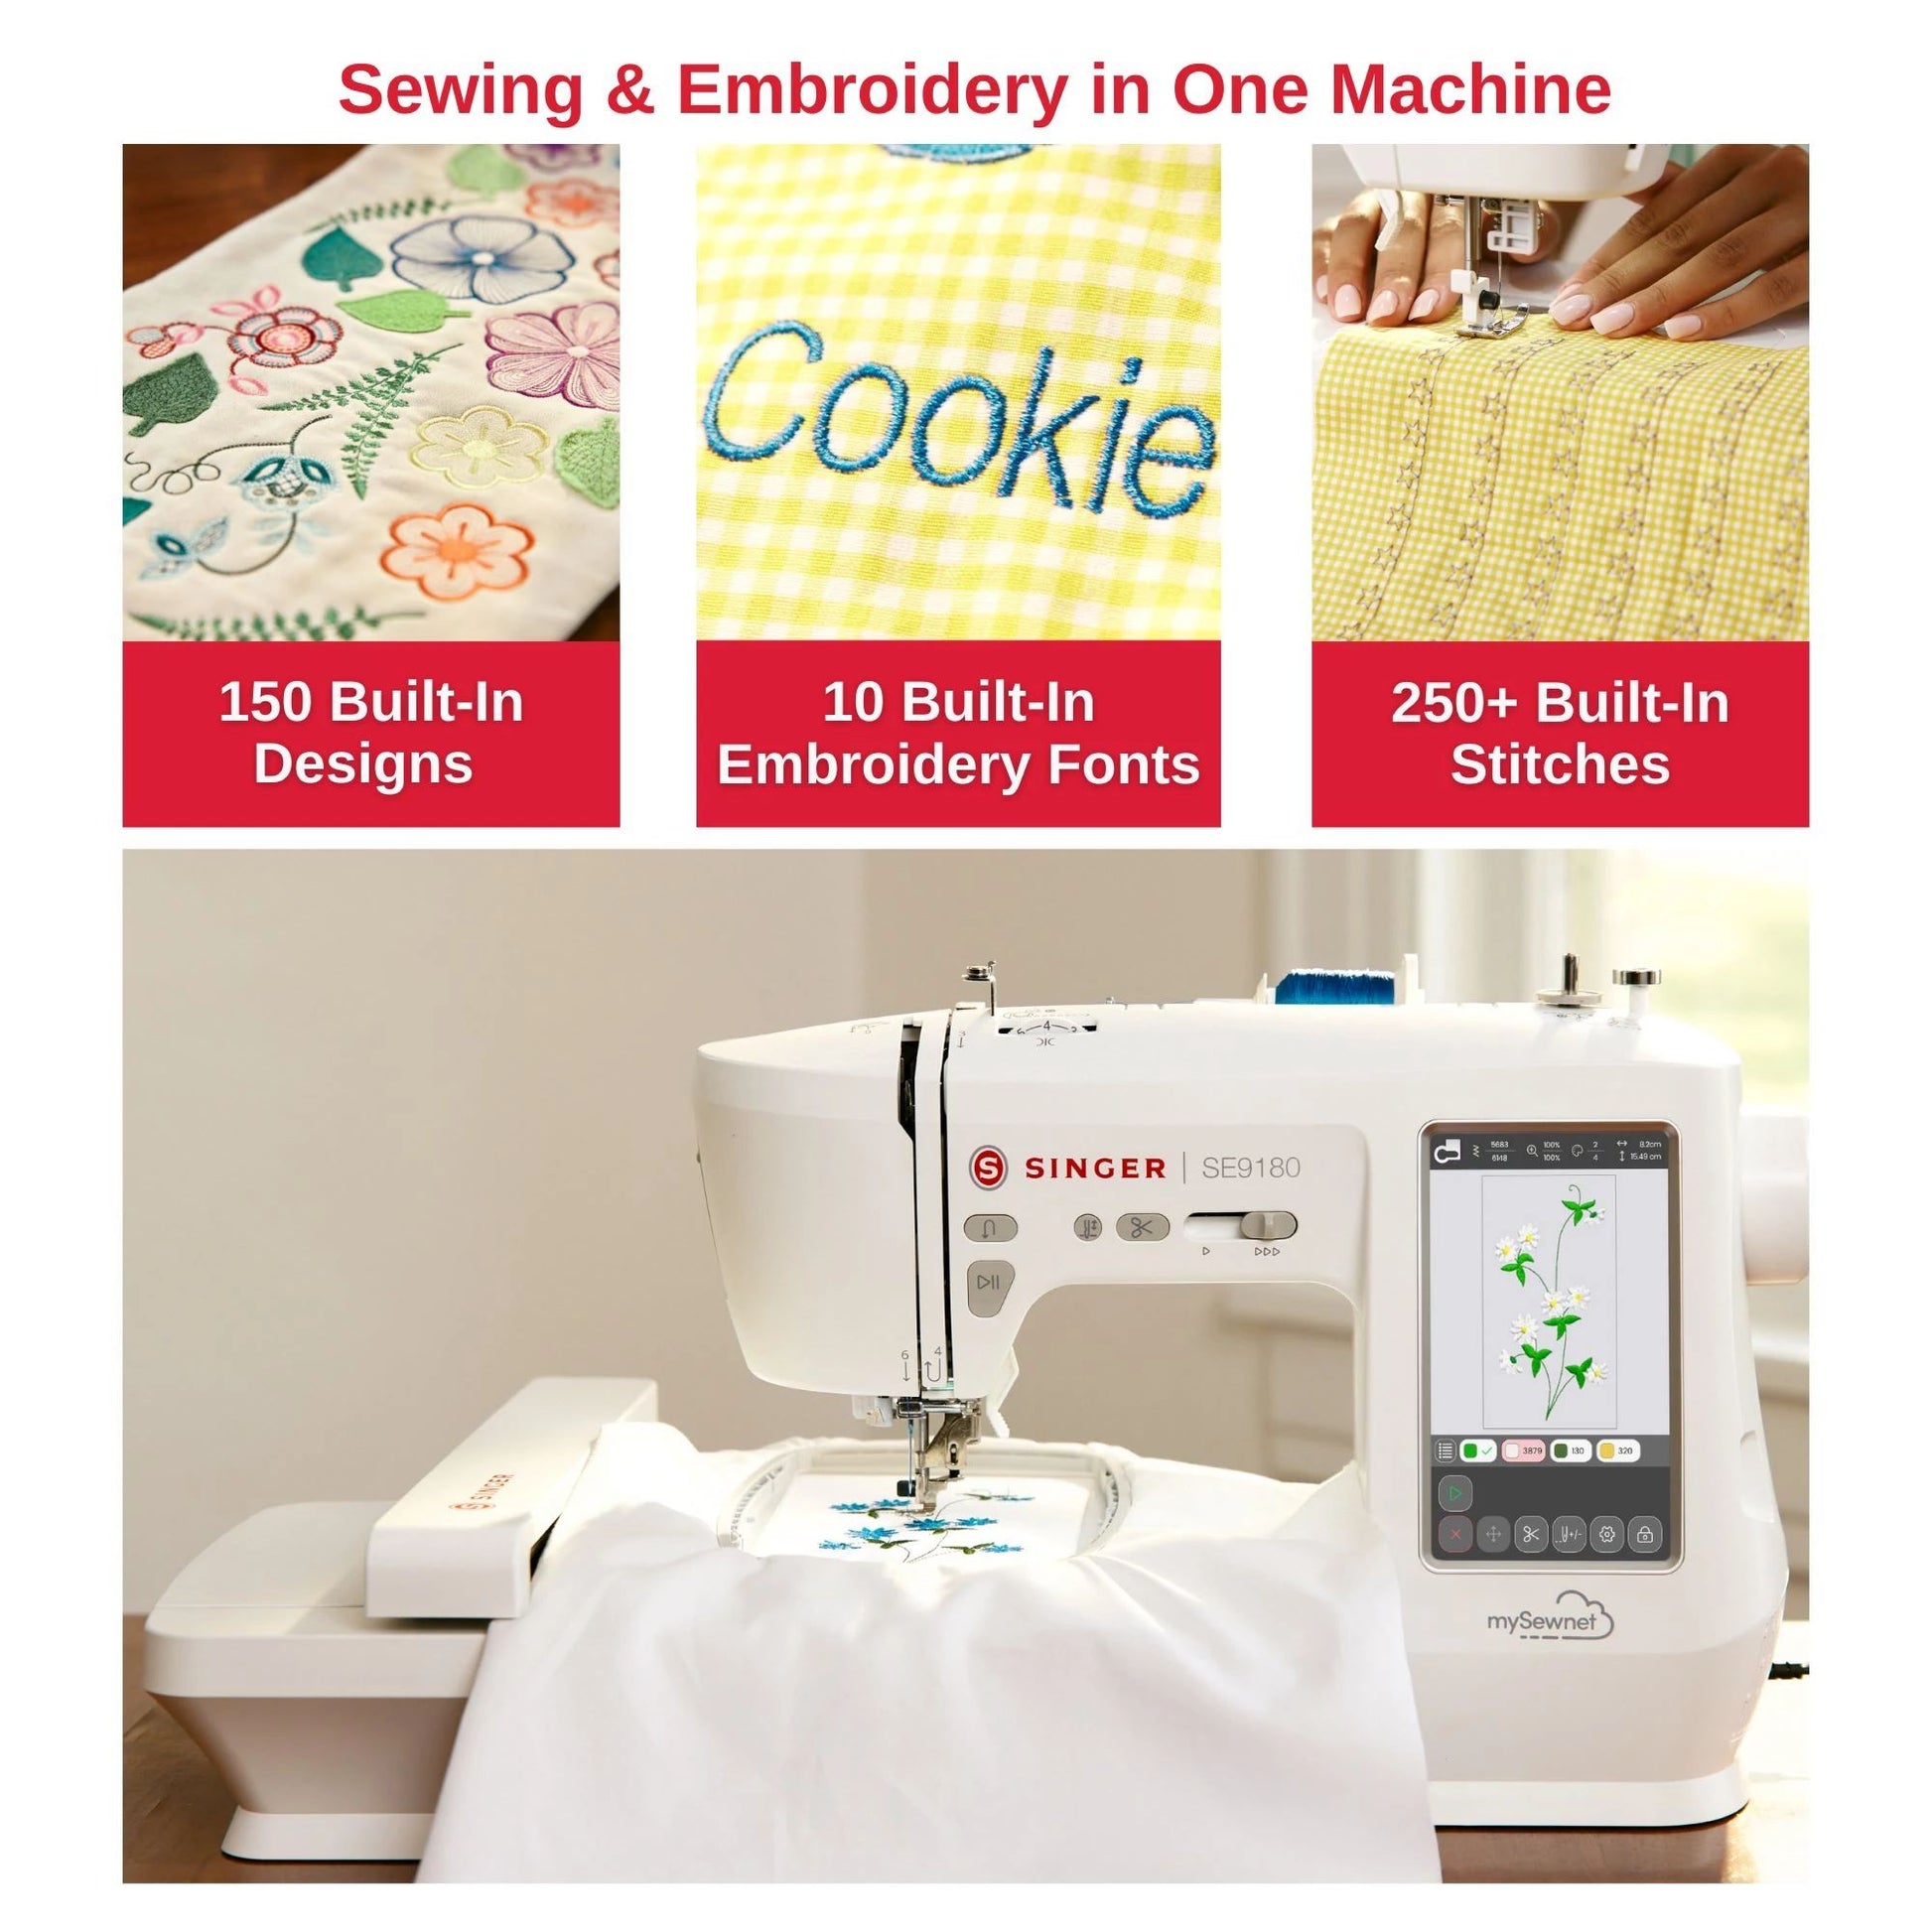 SINGER M1500 Sewing Machine with 6 Built-In Stitches for sale online